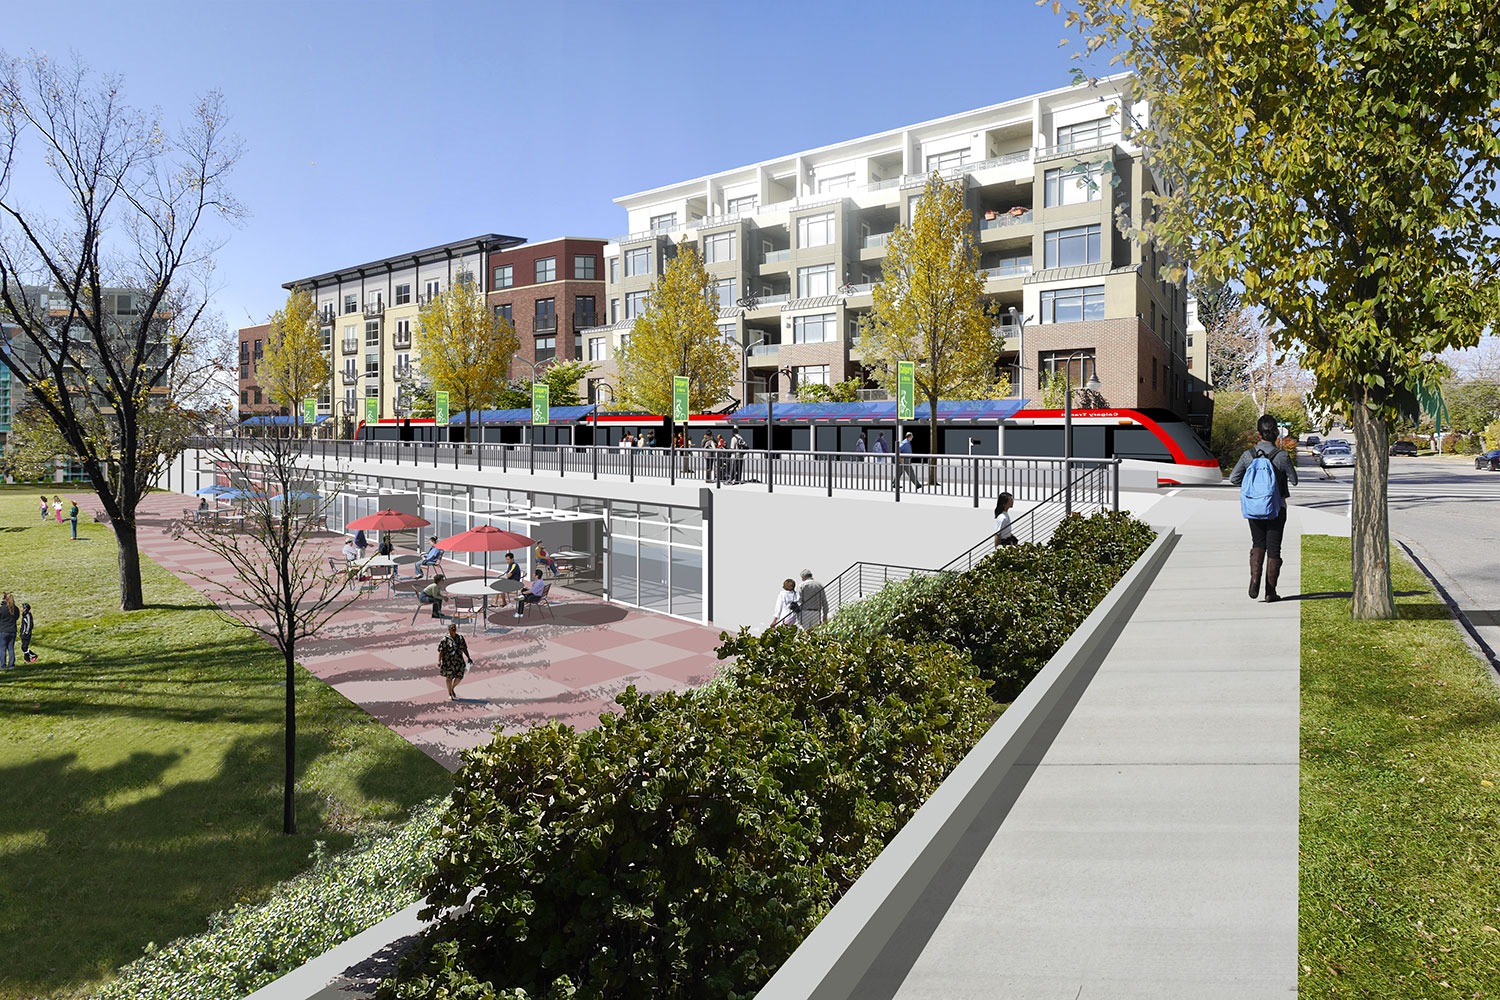 Transit-oriented development (TOD) around Green Line LRT stations could result in vibrant live, work, shop and play areas.
Courtesy City of Calgary